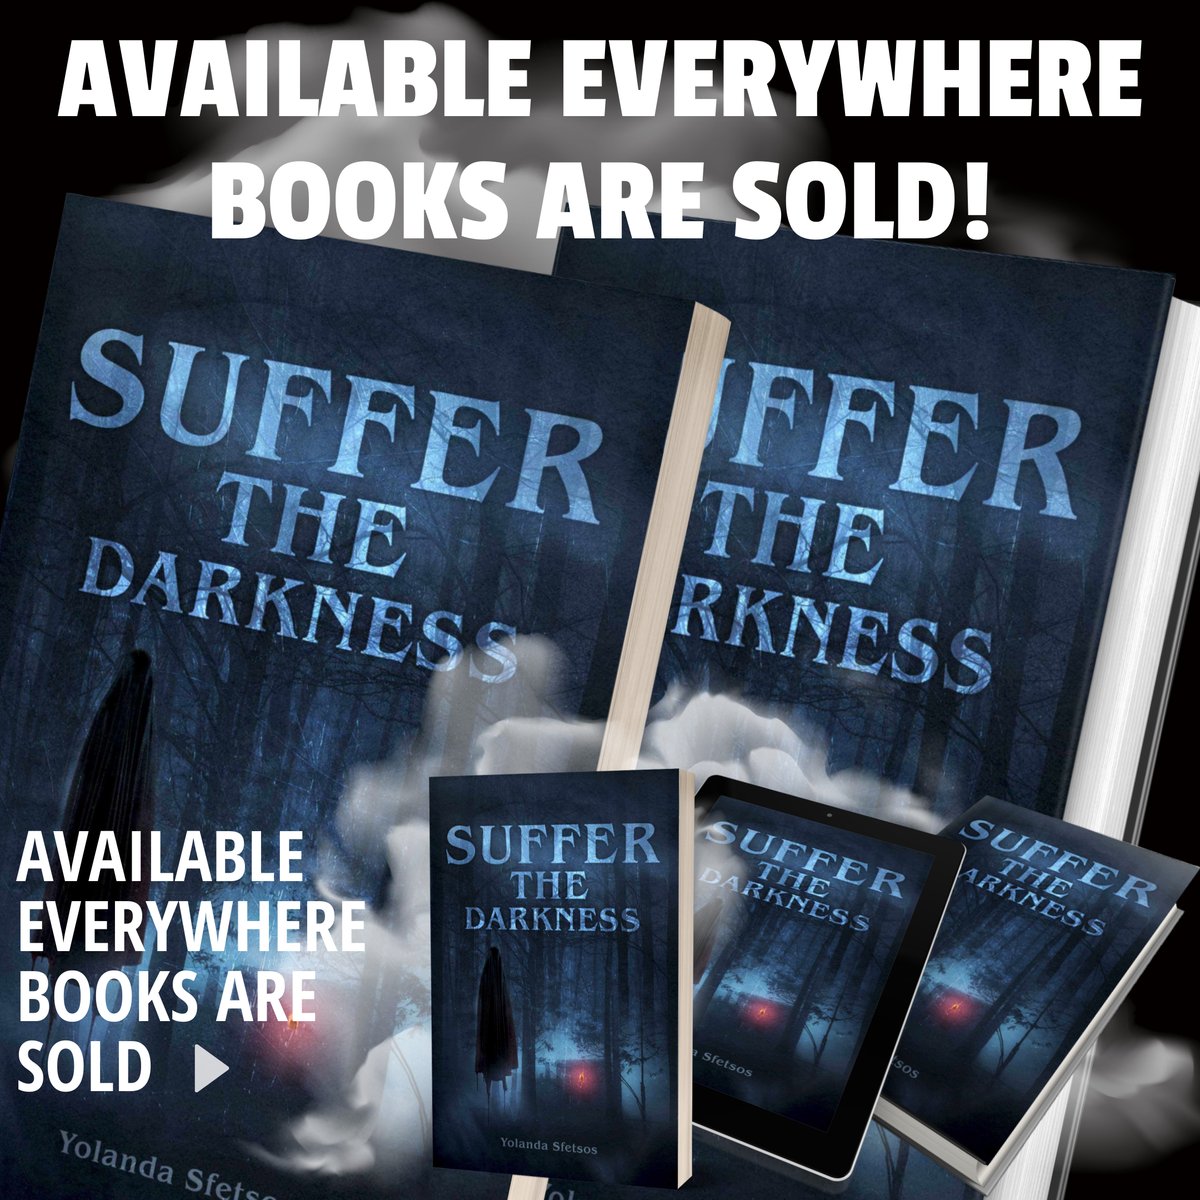 Suffer the Darkness by Yolanda Sfetsos is a gripping tale of resilience and redemption, set against the backdrop of a world enshrouded in shadow and mystery. 💰 BUY THE BOOK! rfr.bz/tldpfxb